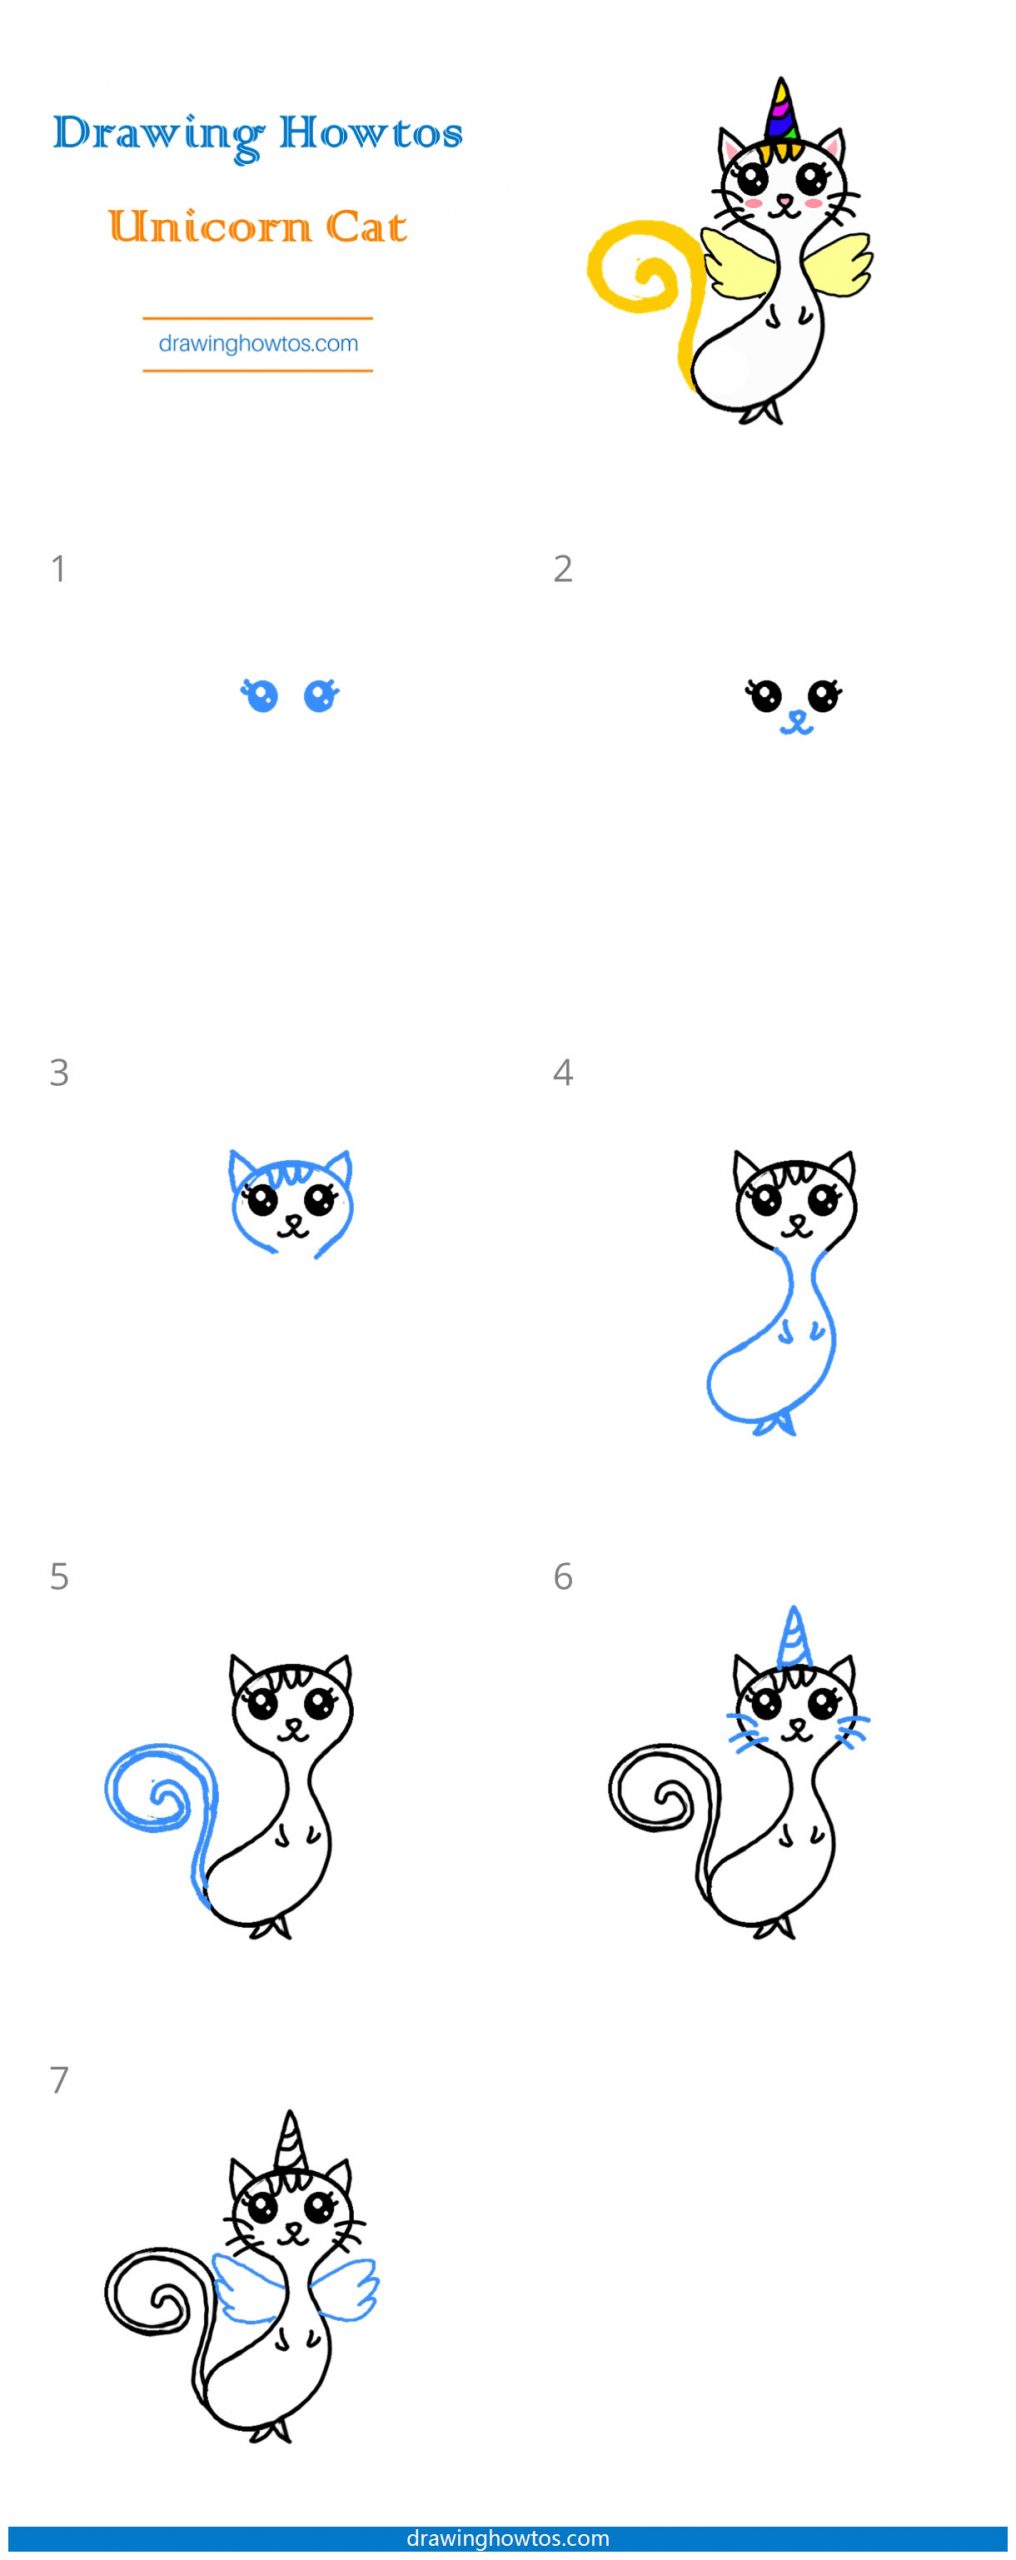 How to Draw a Unicorn Cat Step by Step